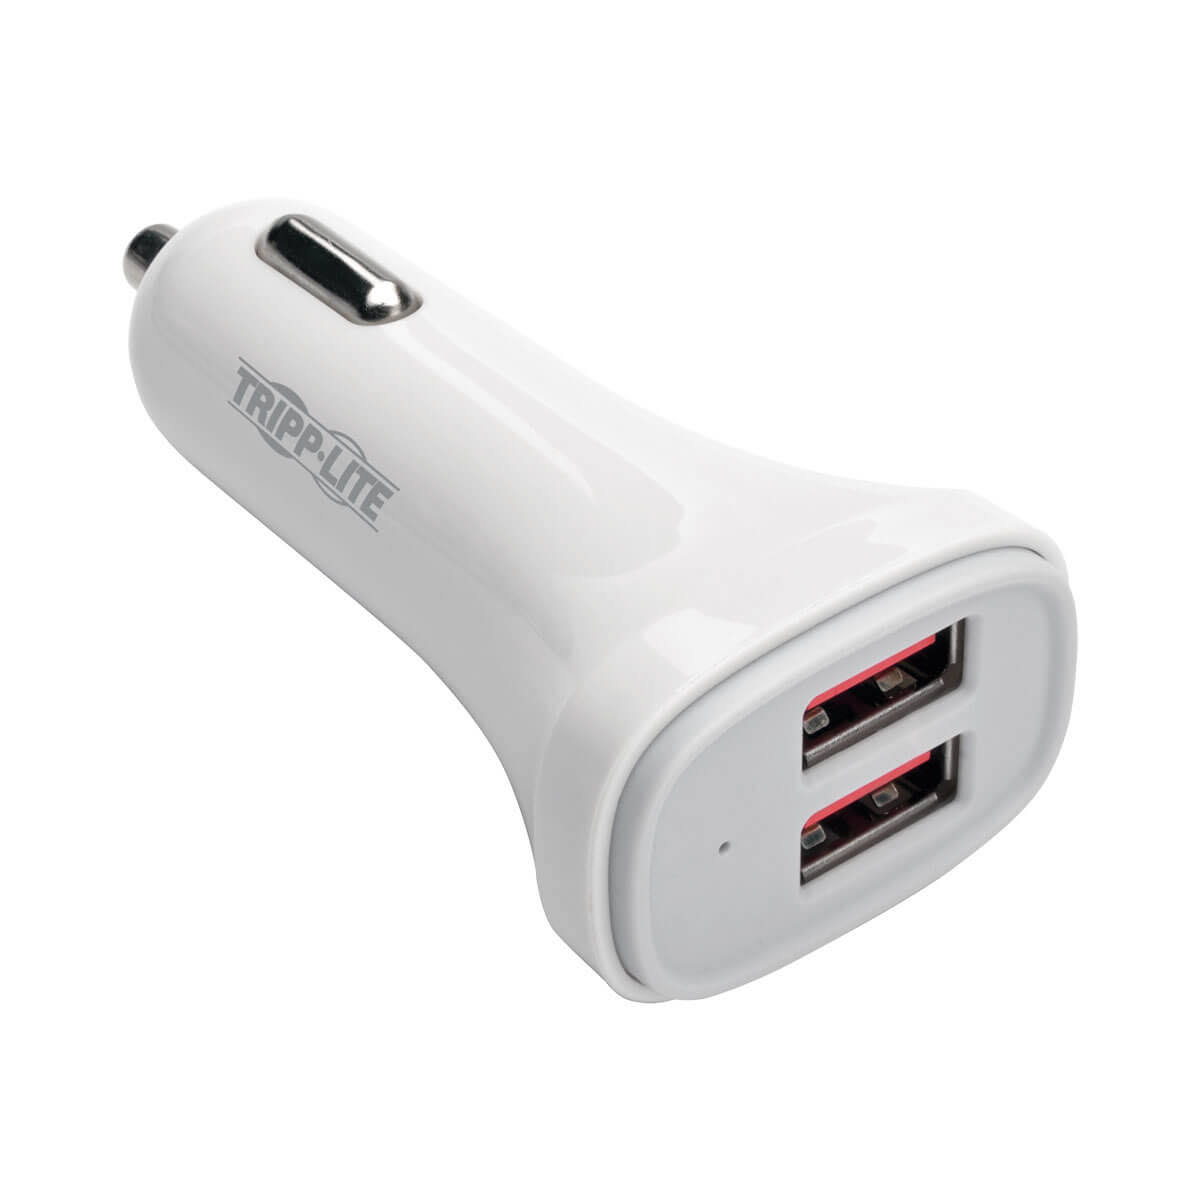 Tripp Lite Dual Port USB Car Charger for Tablets and Cell Phones 5V 4.8A 24W